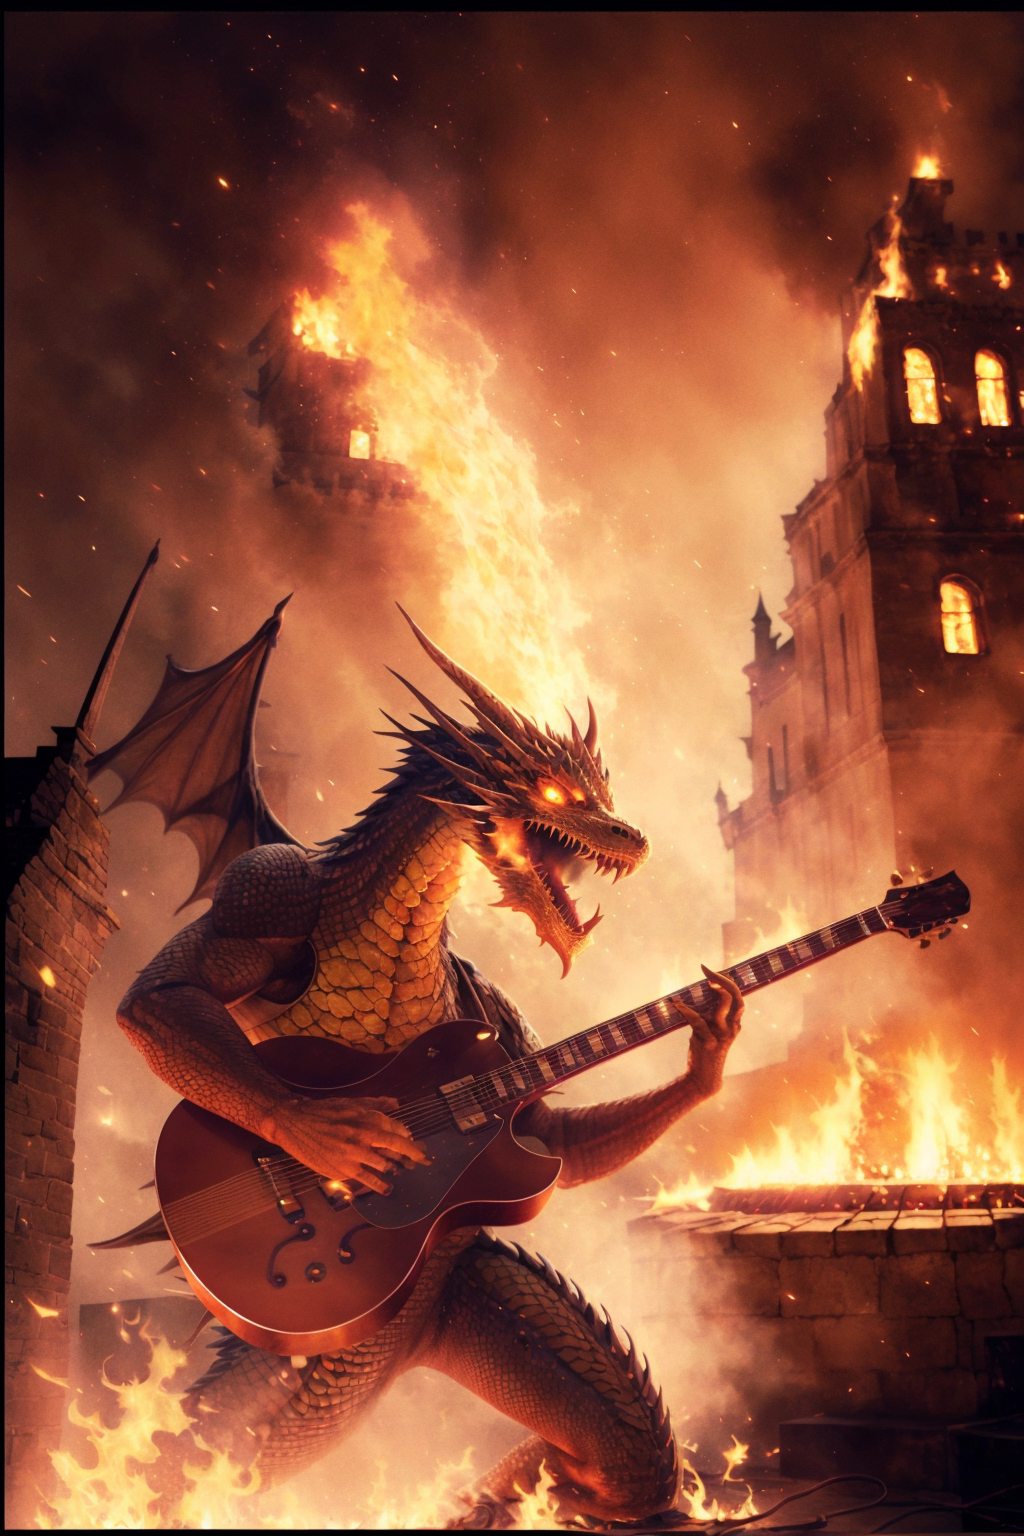 A dragon playing a guitar, surrounded by fire and destruction.